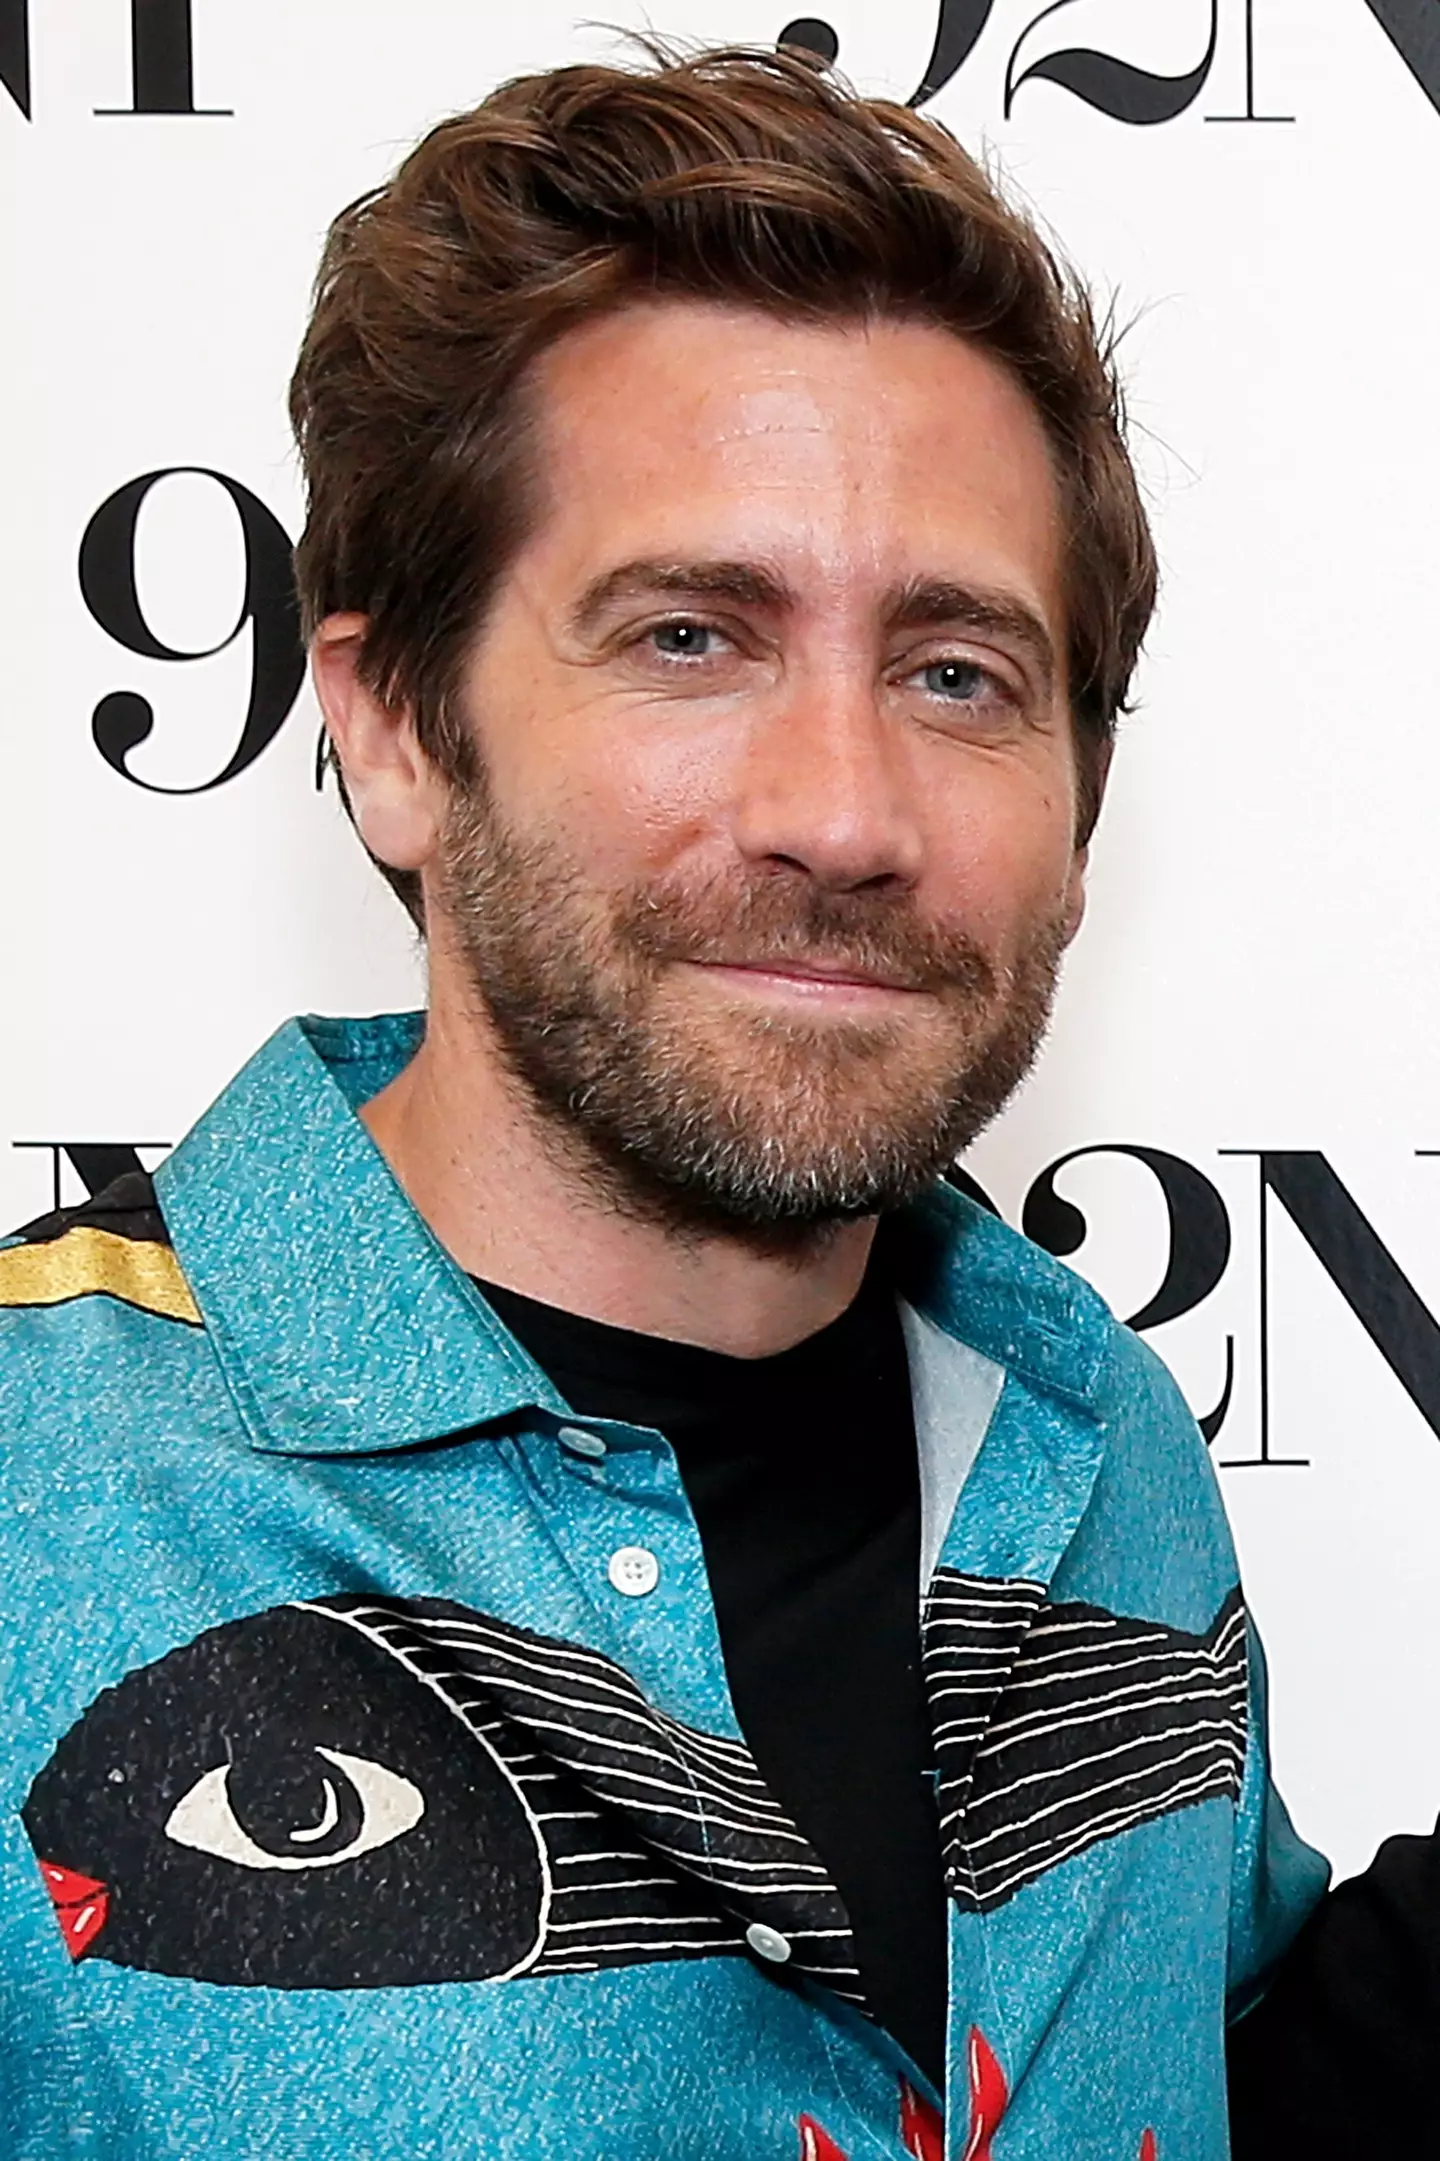 Jake Gyllenhaal has spoken about his sex scenes with Anne Hathaway.